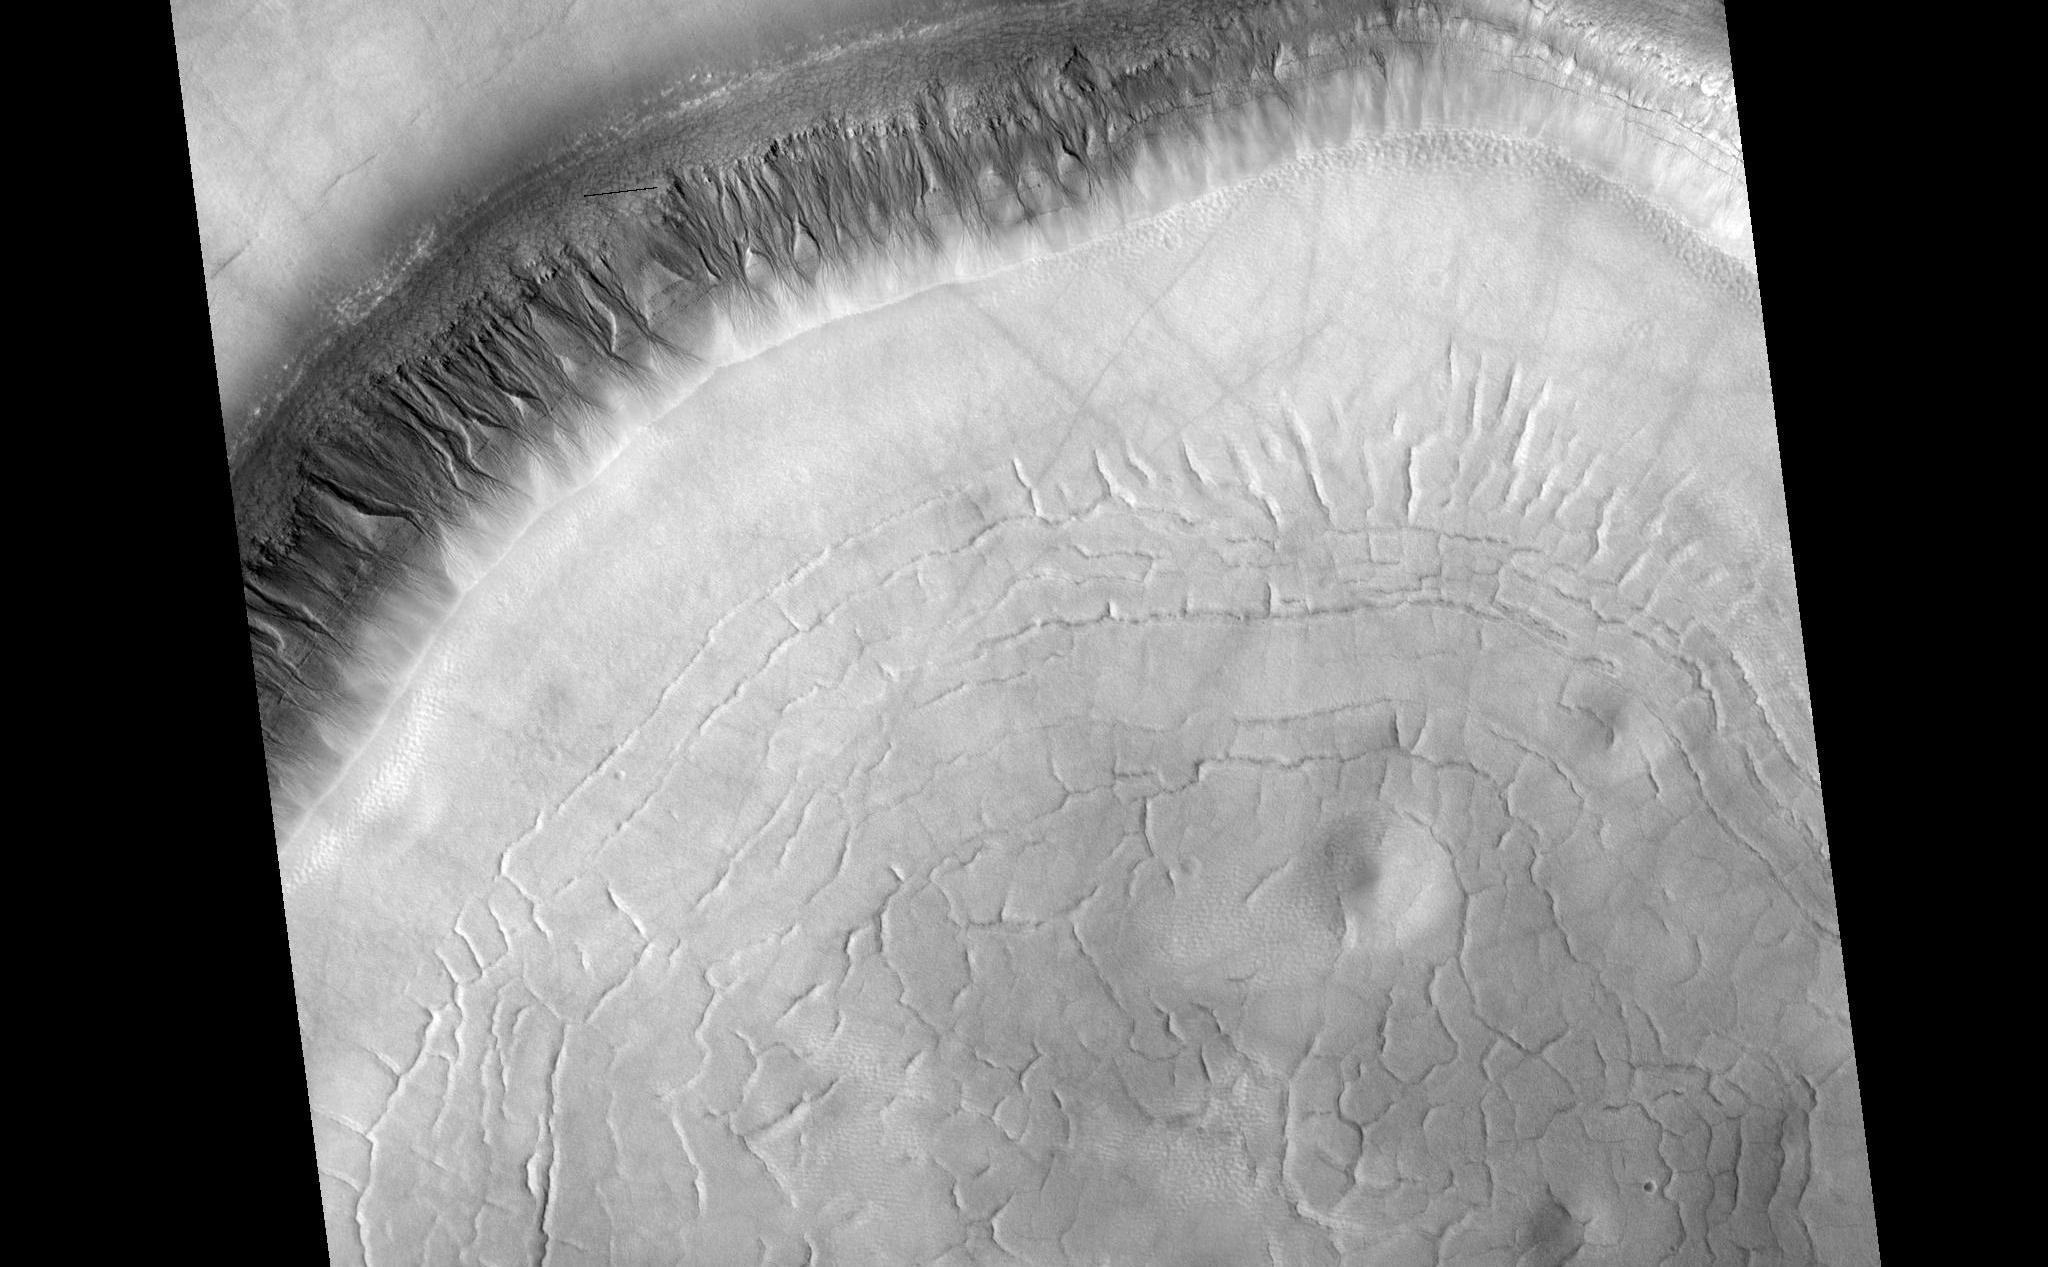 HiRISE image (PSP_001942_2310) shows a crater approximately 11 km (7 miles) in diameter, located in Acidalia Planitia, part of the Northern Plains. Several features in and around this crater are suggestive of fluids and ice at and near the surface. The south-looking (or equator facing) walls of this crater are cut by numerous gullies such as the ones shown in this image's cutout (500 x 600 m or 550 x 650 yards), with well developed alcoves, sinuous channels, and terminal fan deposits. These gullies seem to originate at the same height, suggesting that the carving agent may have emanated from one single layer exposed in the crater's wall. Contrastingly, no gullies are observed in the north-looking (or pole facing) wall of this crater. Terrestrial gullies very similar to the ones shown in this image are produced by surface water. The arrows in the cutout show fissures that may indicate detachment of surficial materials possibly held together by subsurface ice, sliding en masse down the crater's wall. The muted topography of the crater and its surroundings, the relatively shallow floor (300 m or 330 yards), the convex slope of its walls-all are consistent with ice being present under the surface, mixed with rocks and soil. Ice would have acted as a lubricant, facilitating the flow of rocks and soils and hence smoothing landscape's features such as ridges and craters' rims.The concentric and radial fissures in the crater's floor may indicate decrease of volume due to loss of underground ice. Piles of rocks aligned along these fissures and arranged forming polygons are similar to features observed in terrestrial periglacial regions such as Antarctica. Antarctica's features are produced by repeated expansion and contraction of subsurface soil and ice, due to seasonal temperature oscillations. The funnel-shaped depressions visible in the crater's floor could be collapse pits, further evidence of ice decay; alternatively, they could be smoothed-out impact craters.